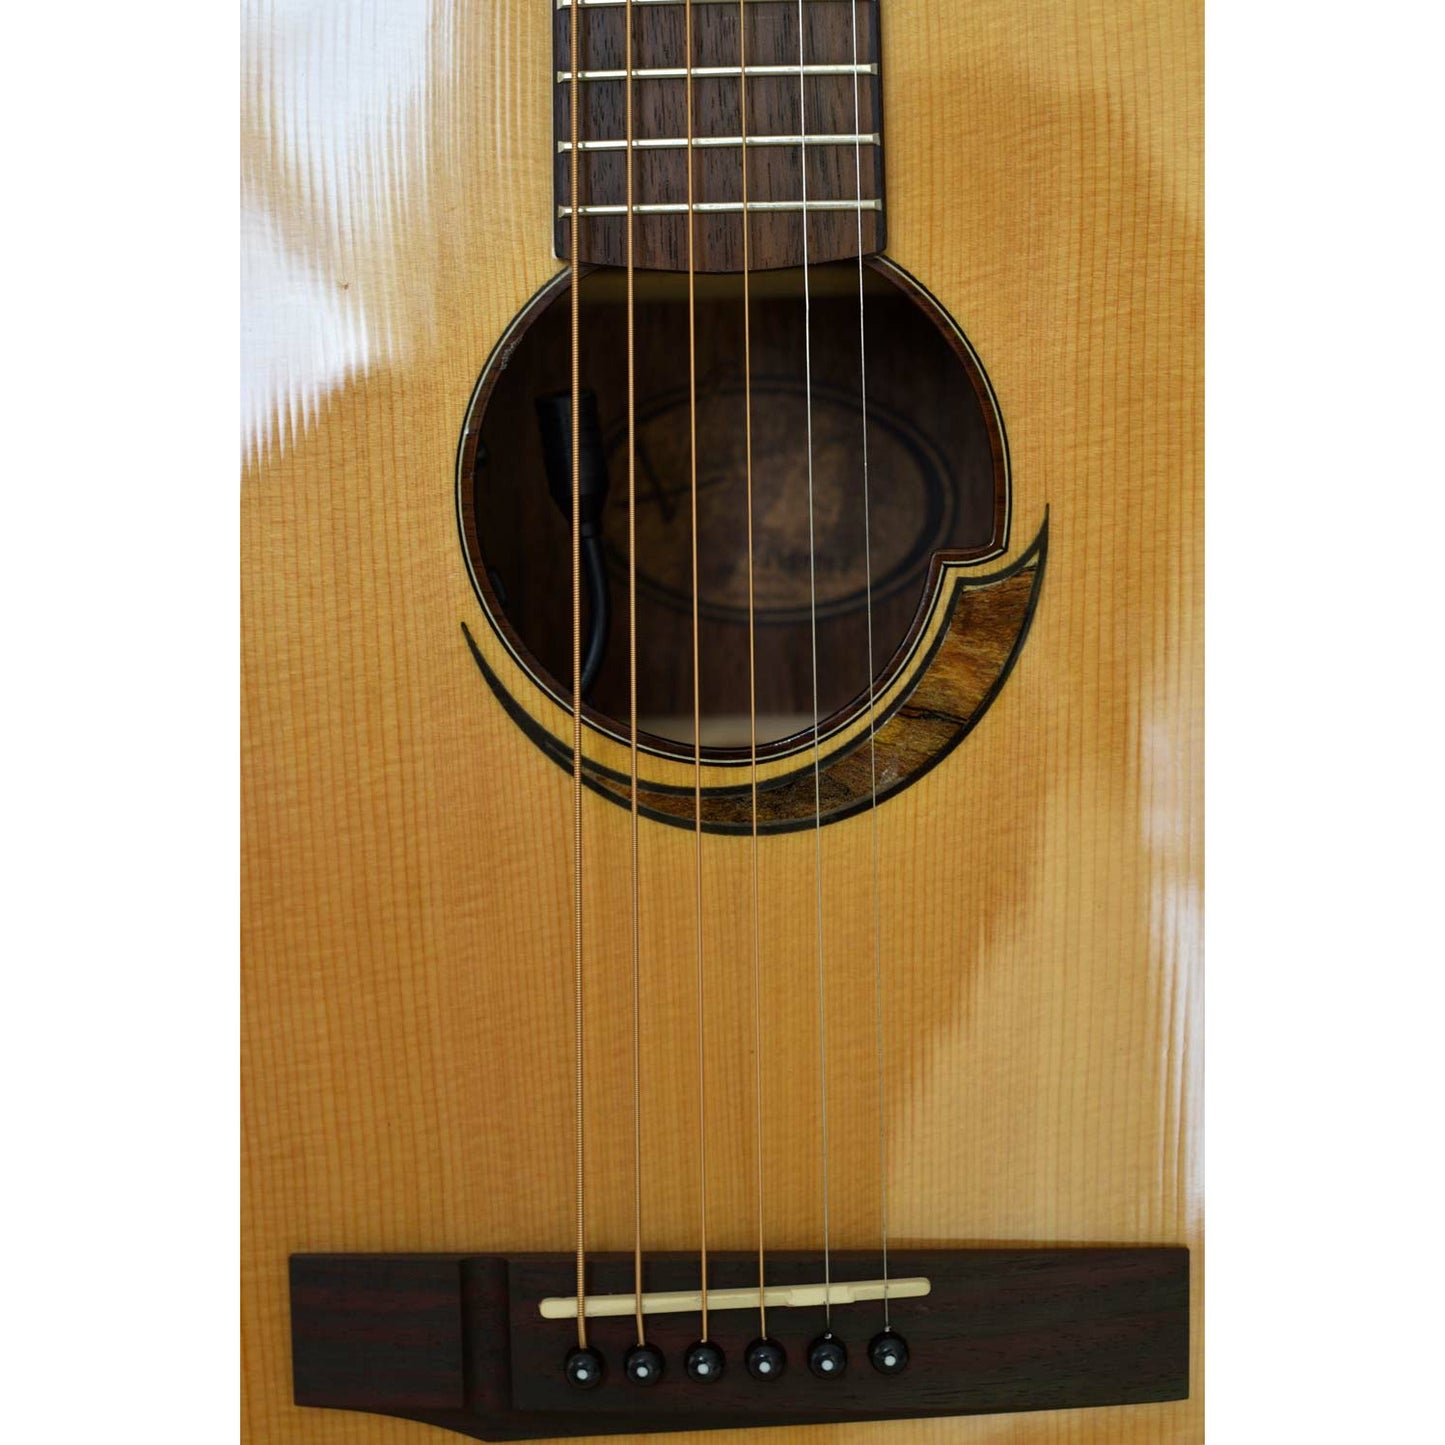 Andrew White Freja Moon 2 Natural With Hard Case